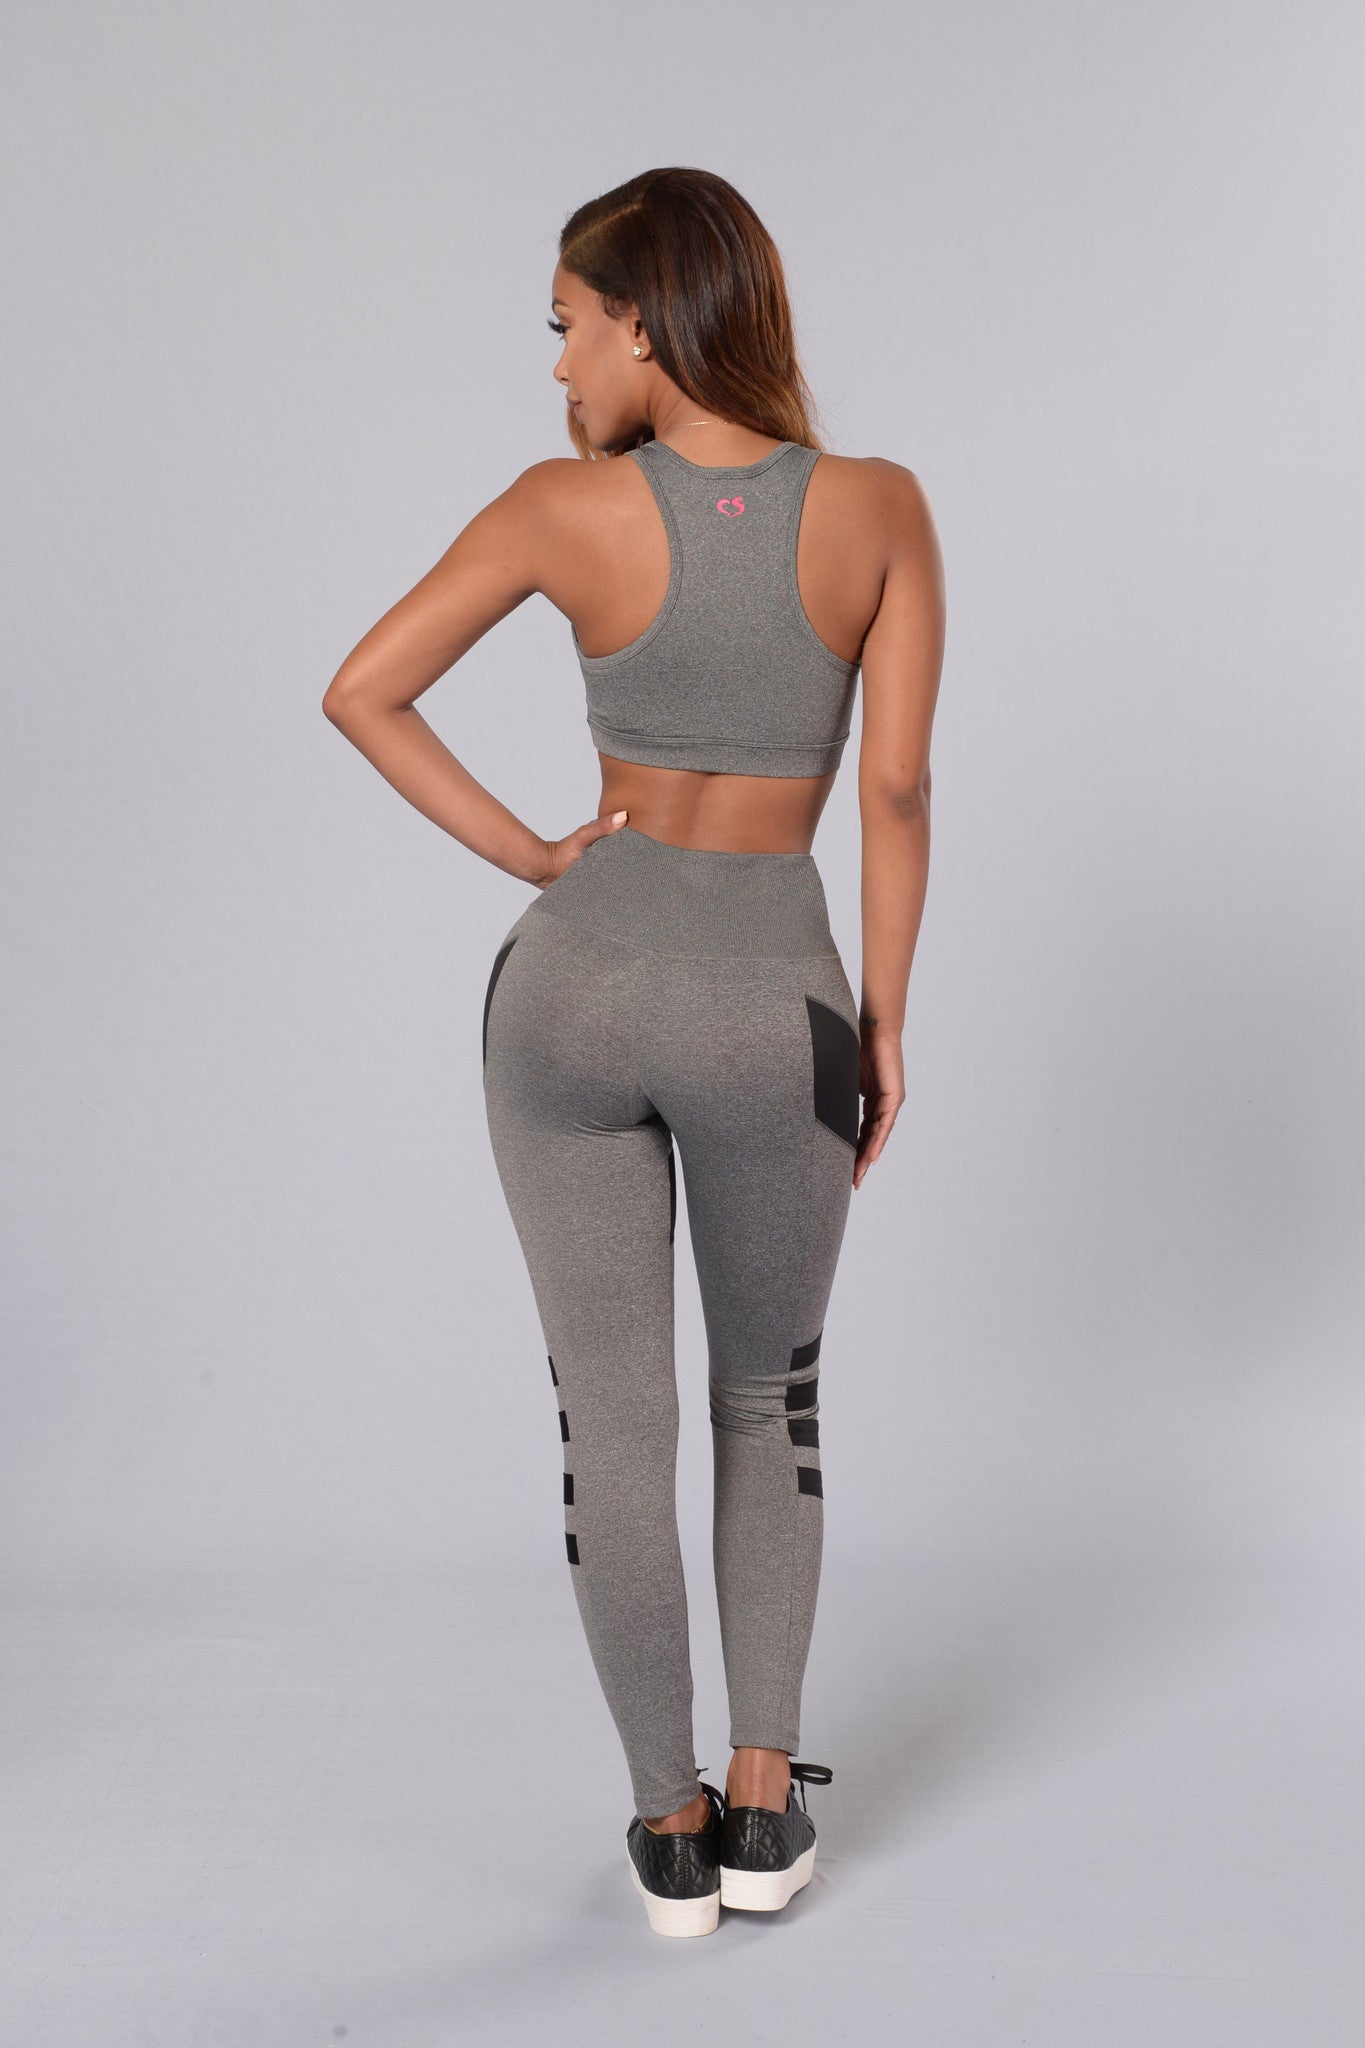 In Shape Top - Charcoal